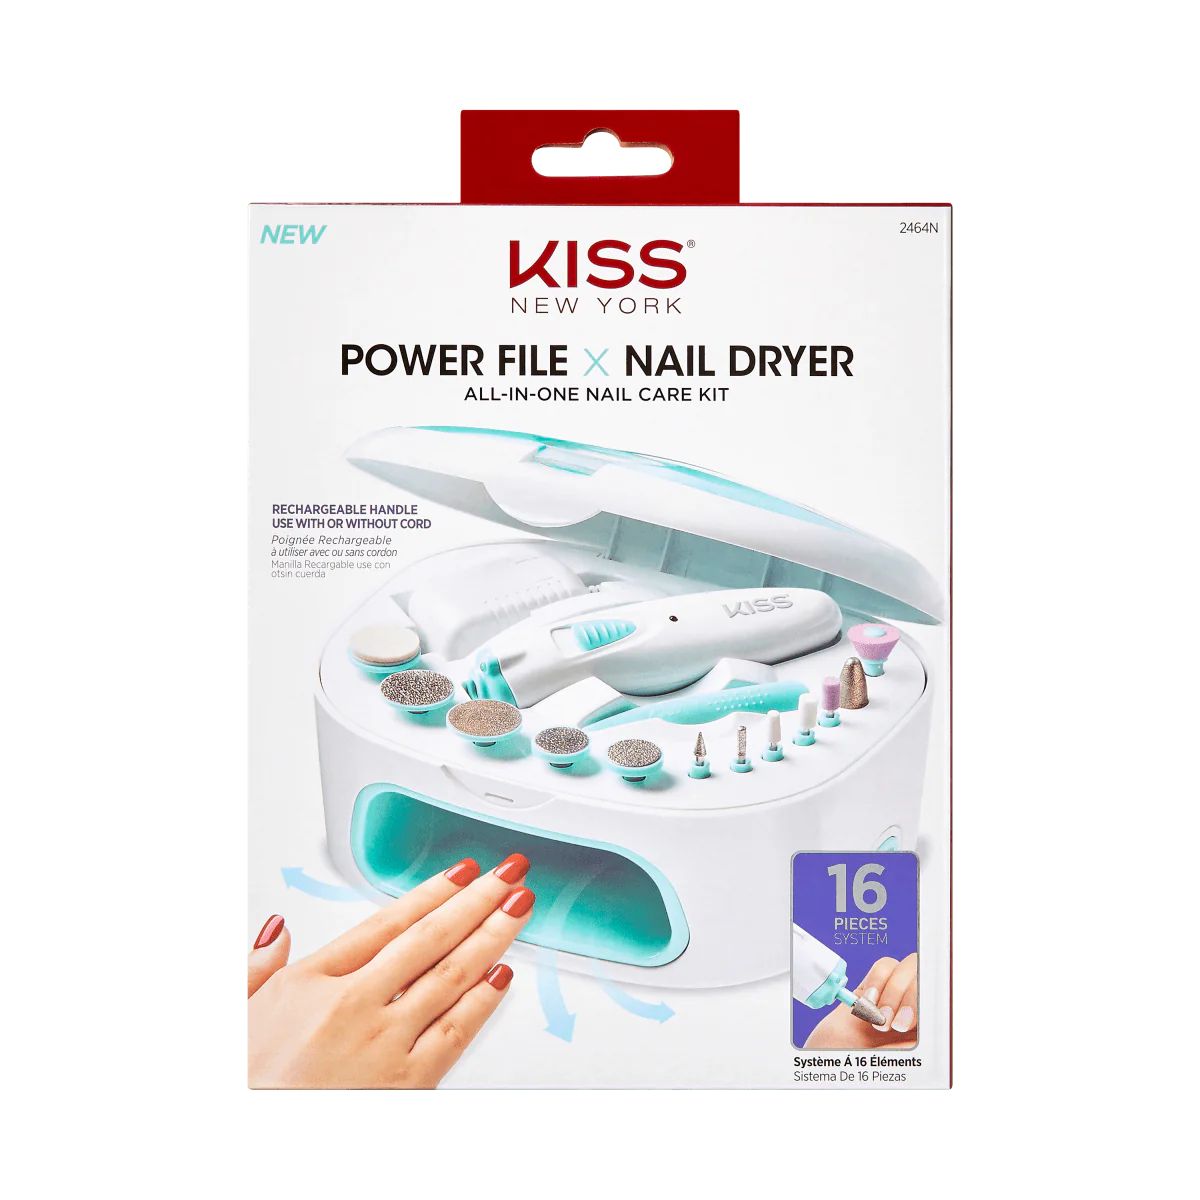 KISS Power File Deluxe Nail File Rechargeable | KISS, imPRESS, JOAH